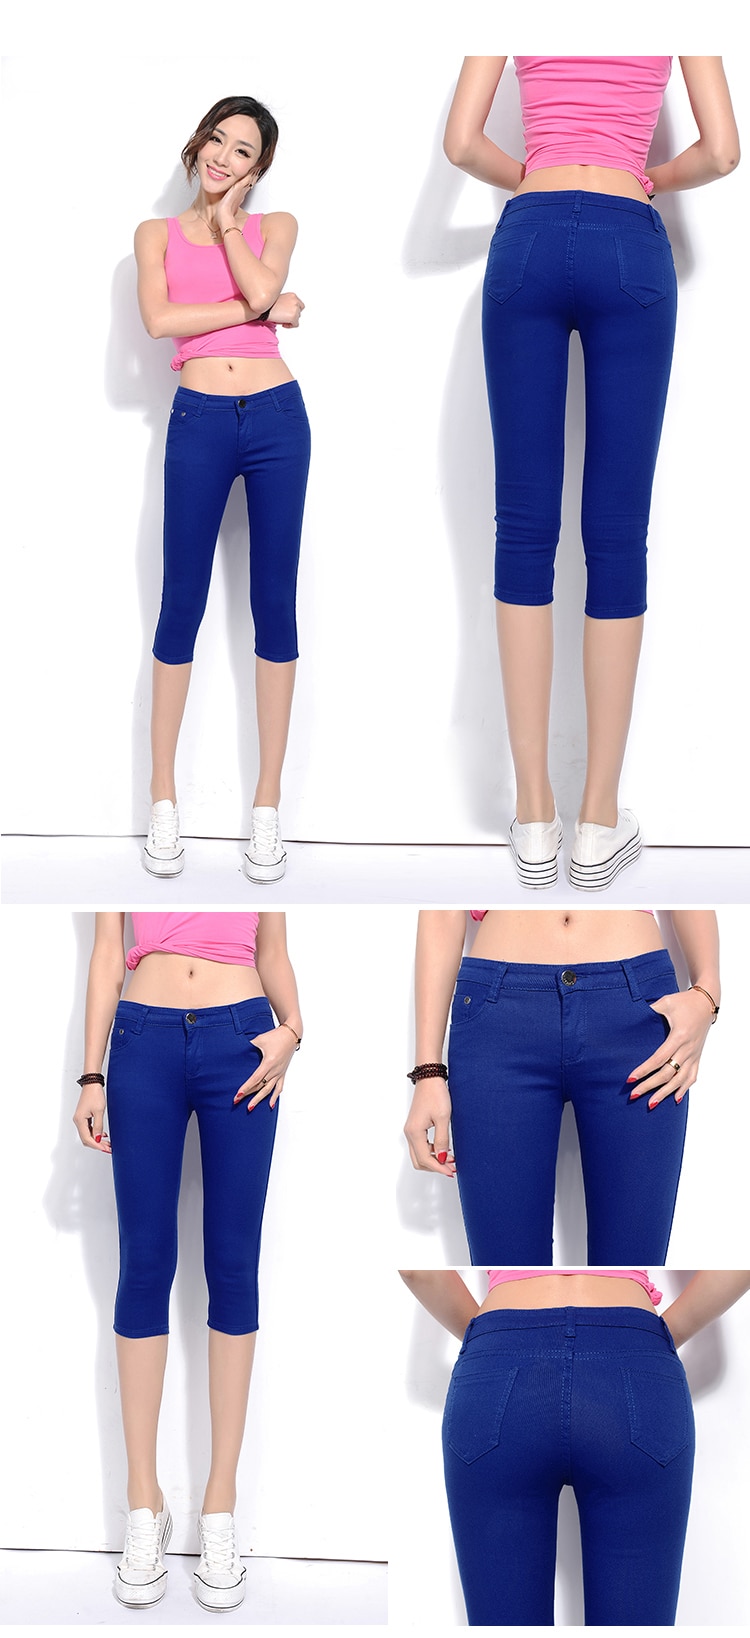 2018 New Spring Leisure Stretch Candy Color Cropped pants Female pencil pants Thin section Trousers Female feet Breeches (20)